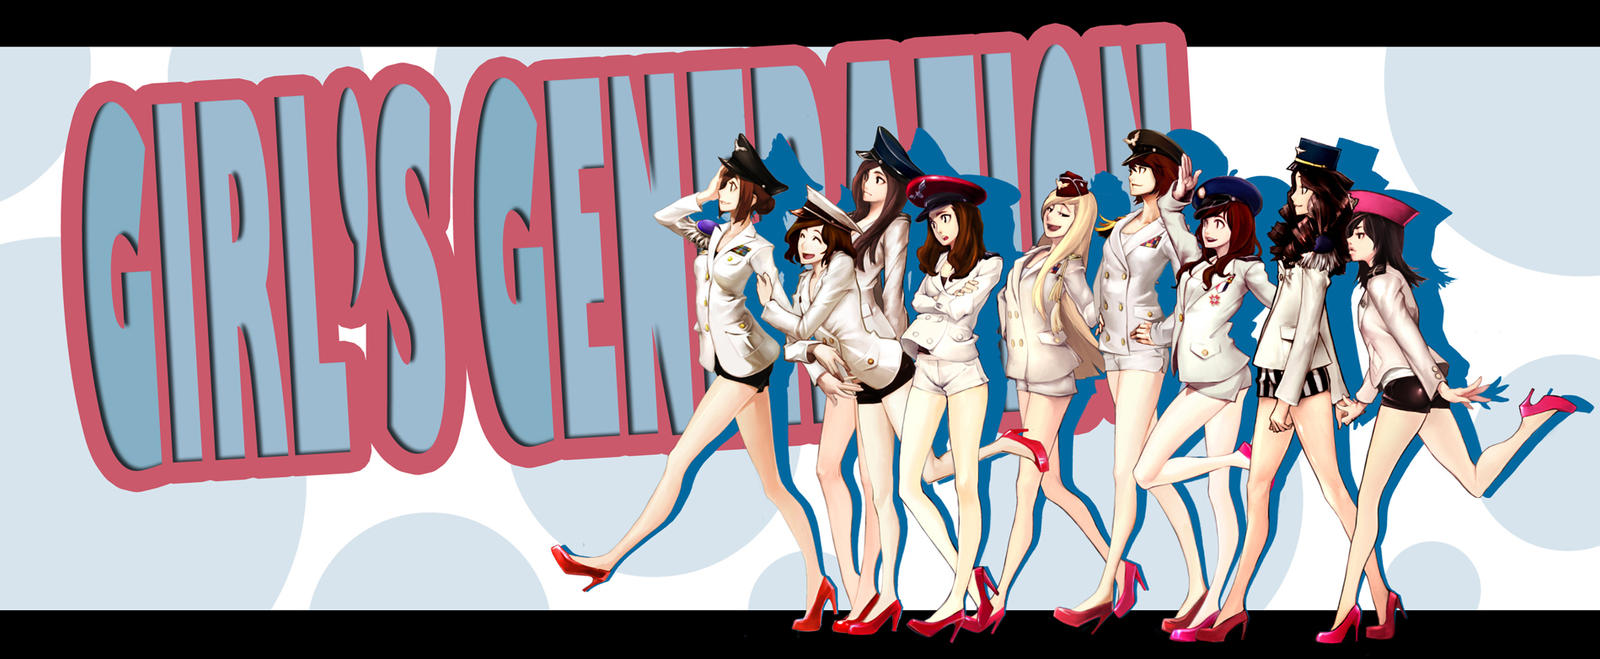 Girl's Generation the Ginie